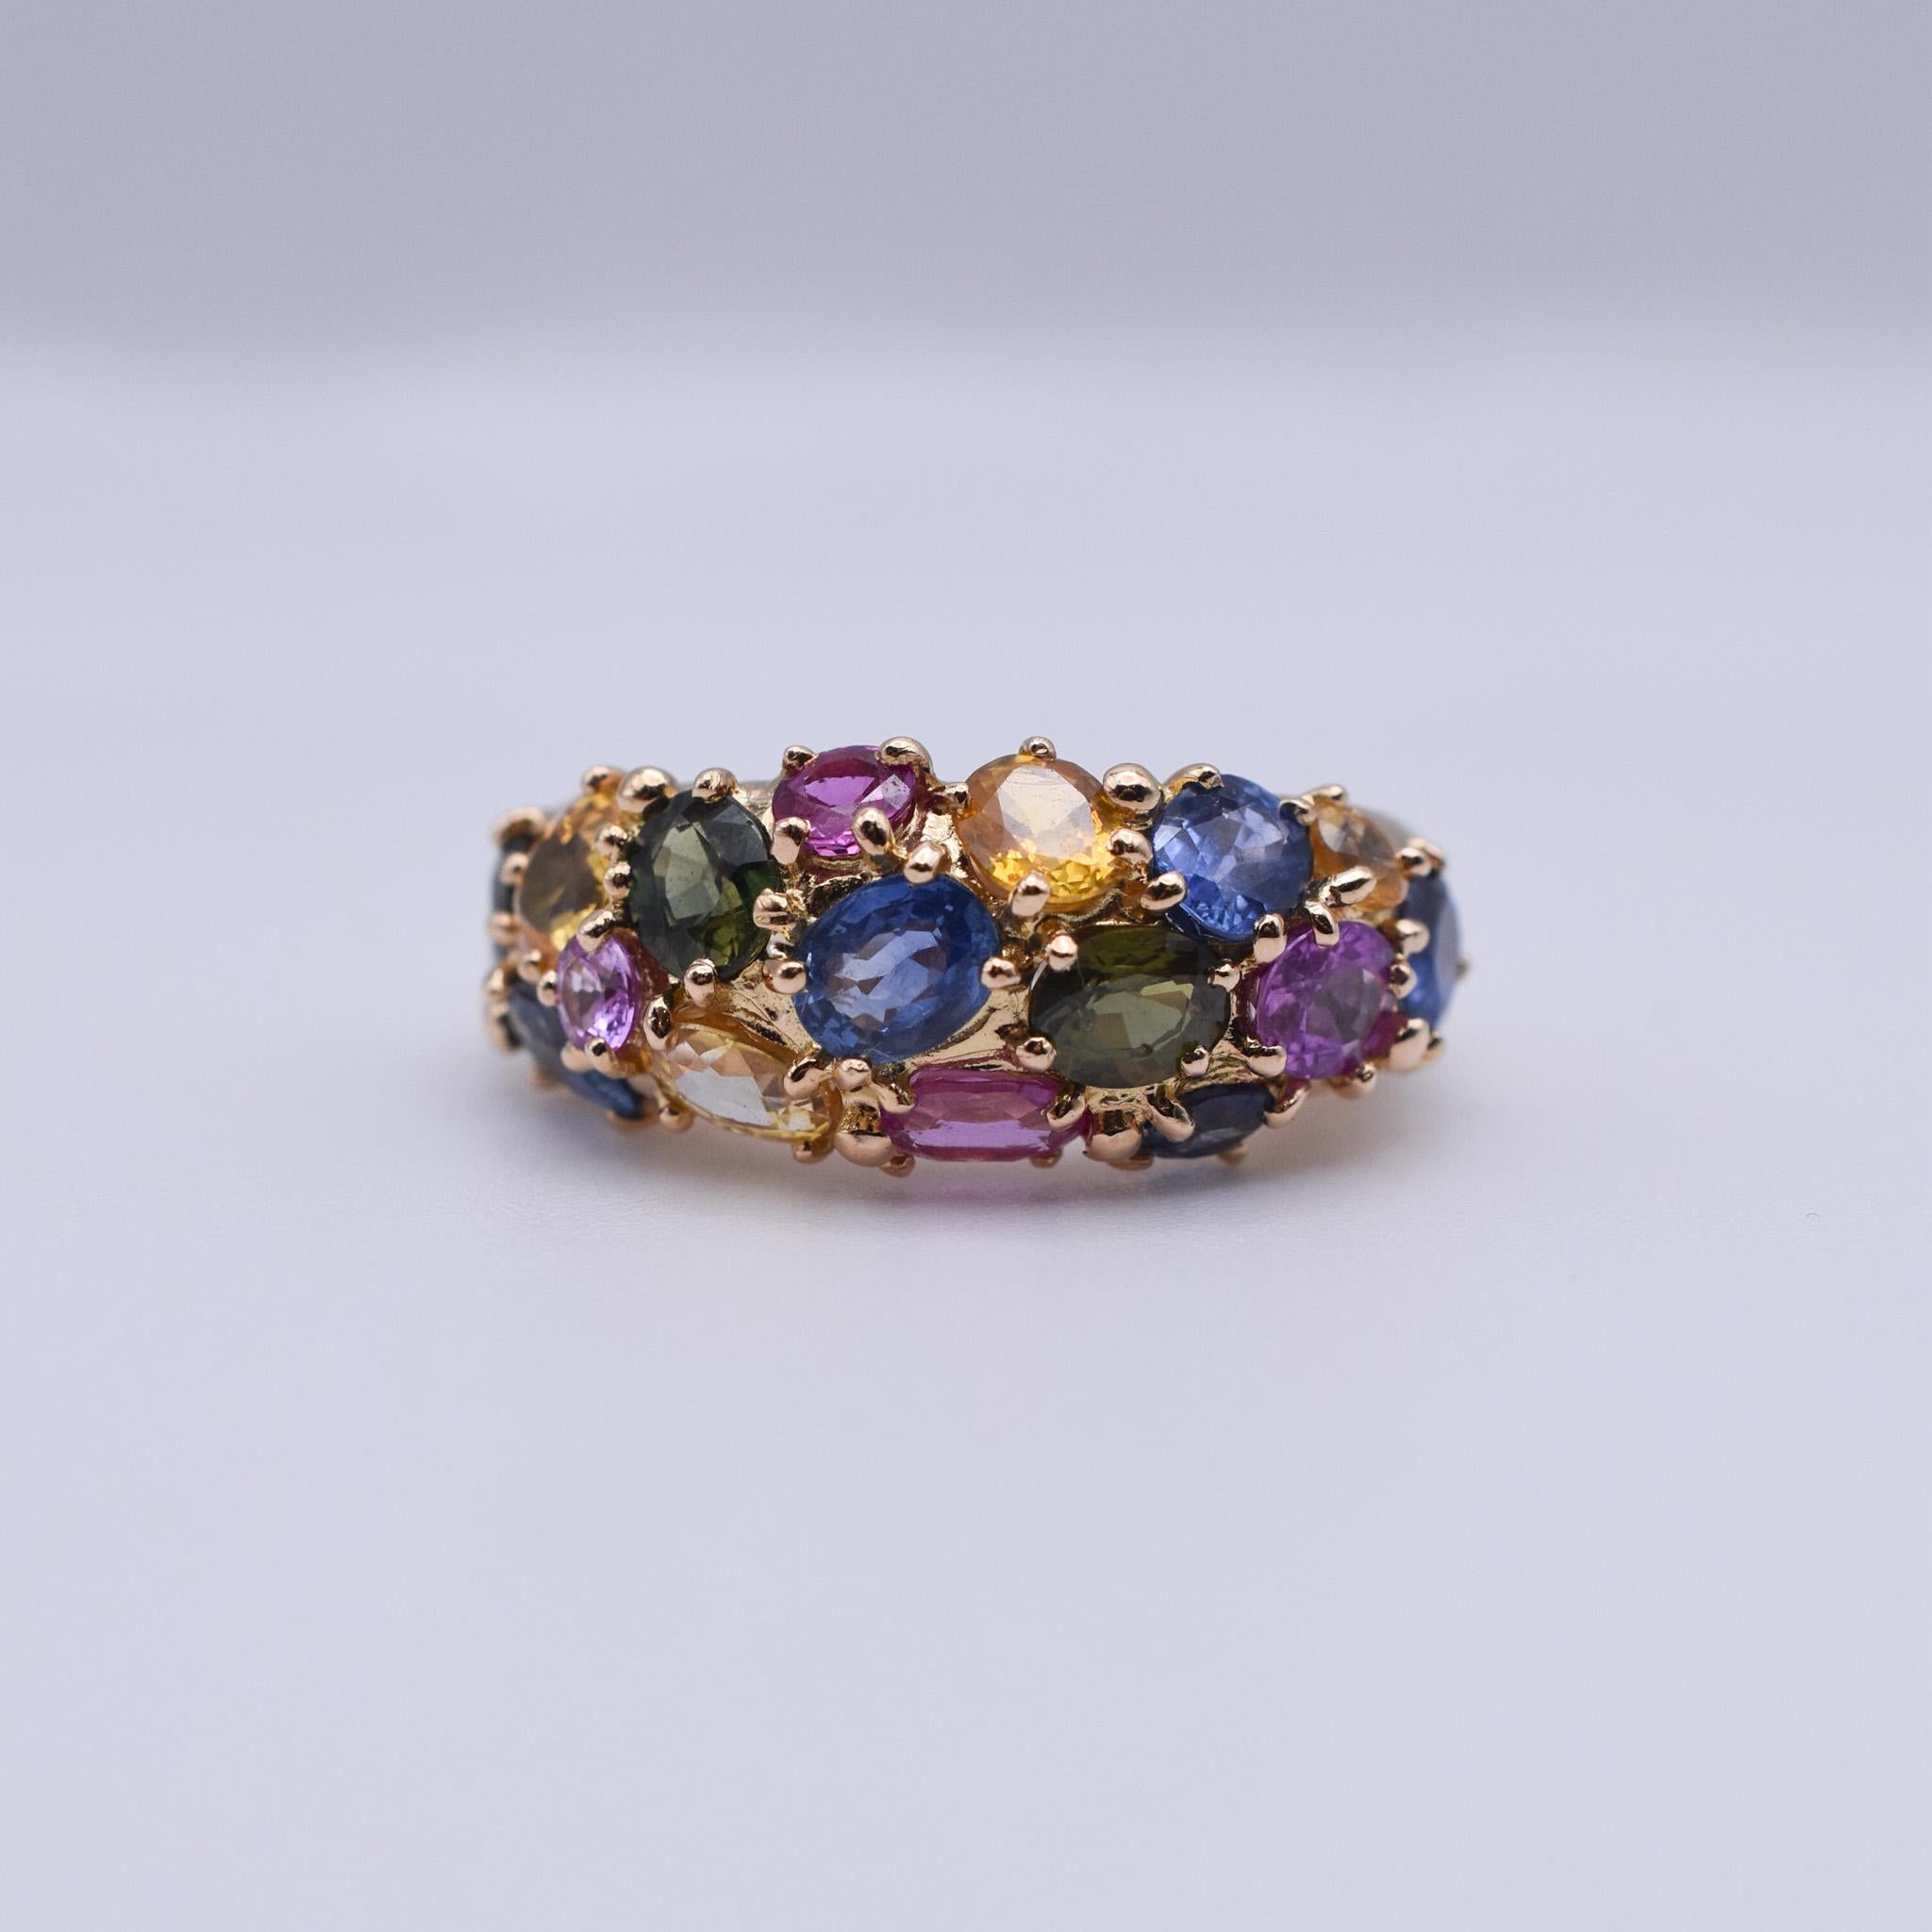 An elegant Chaumet Multi-colour Sapphire Earclips and Ring set mounted on 18k Yellow Gold. Signed Chaumet Paris. Made in Paris, circa 1970. 

Ring size: US 4.75